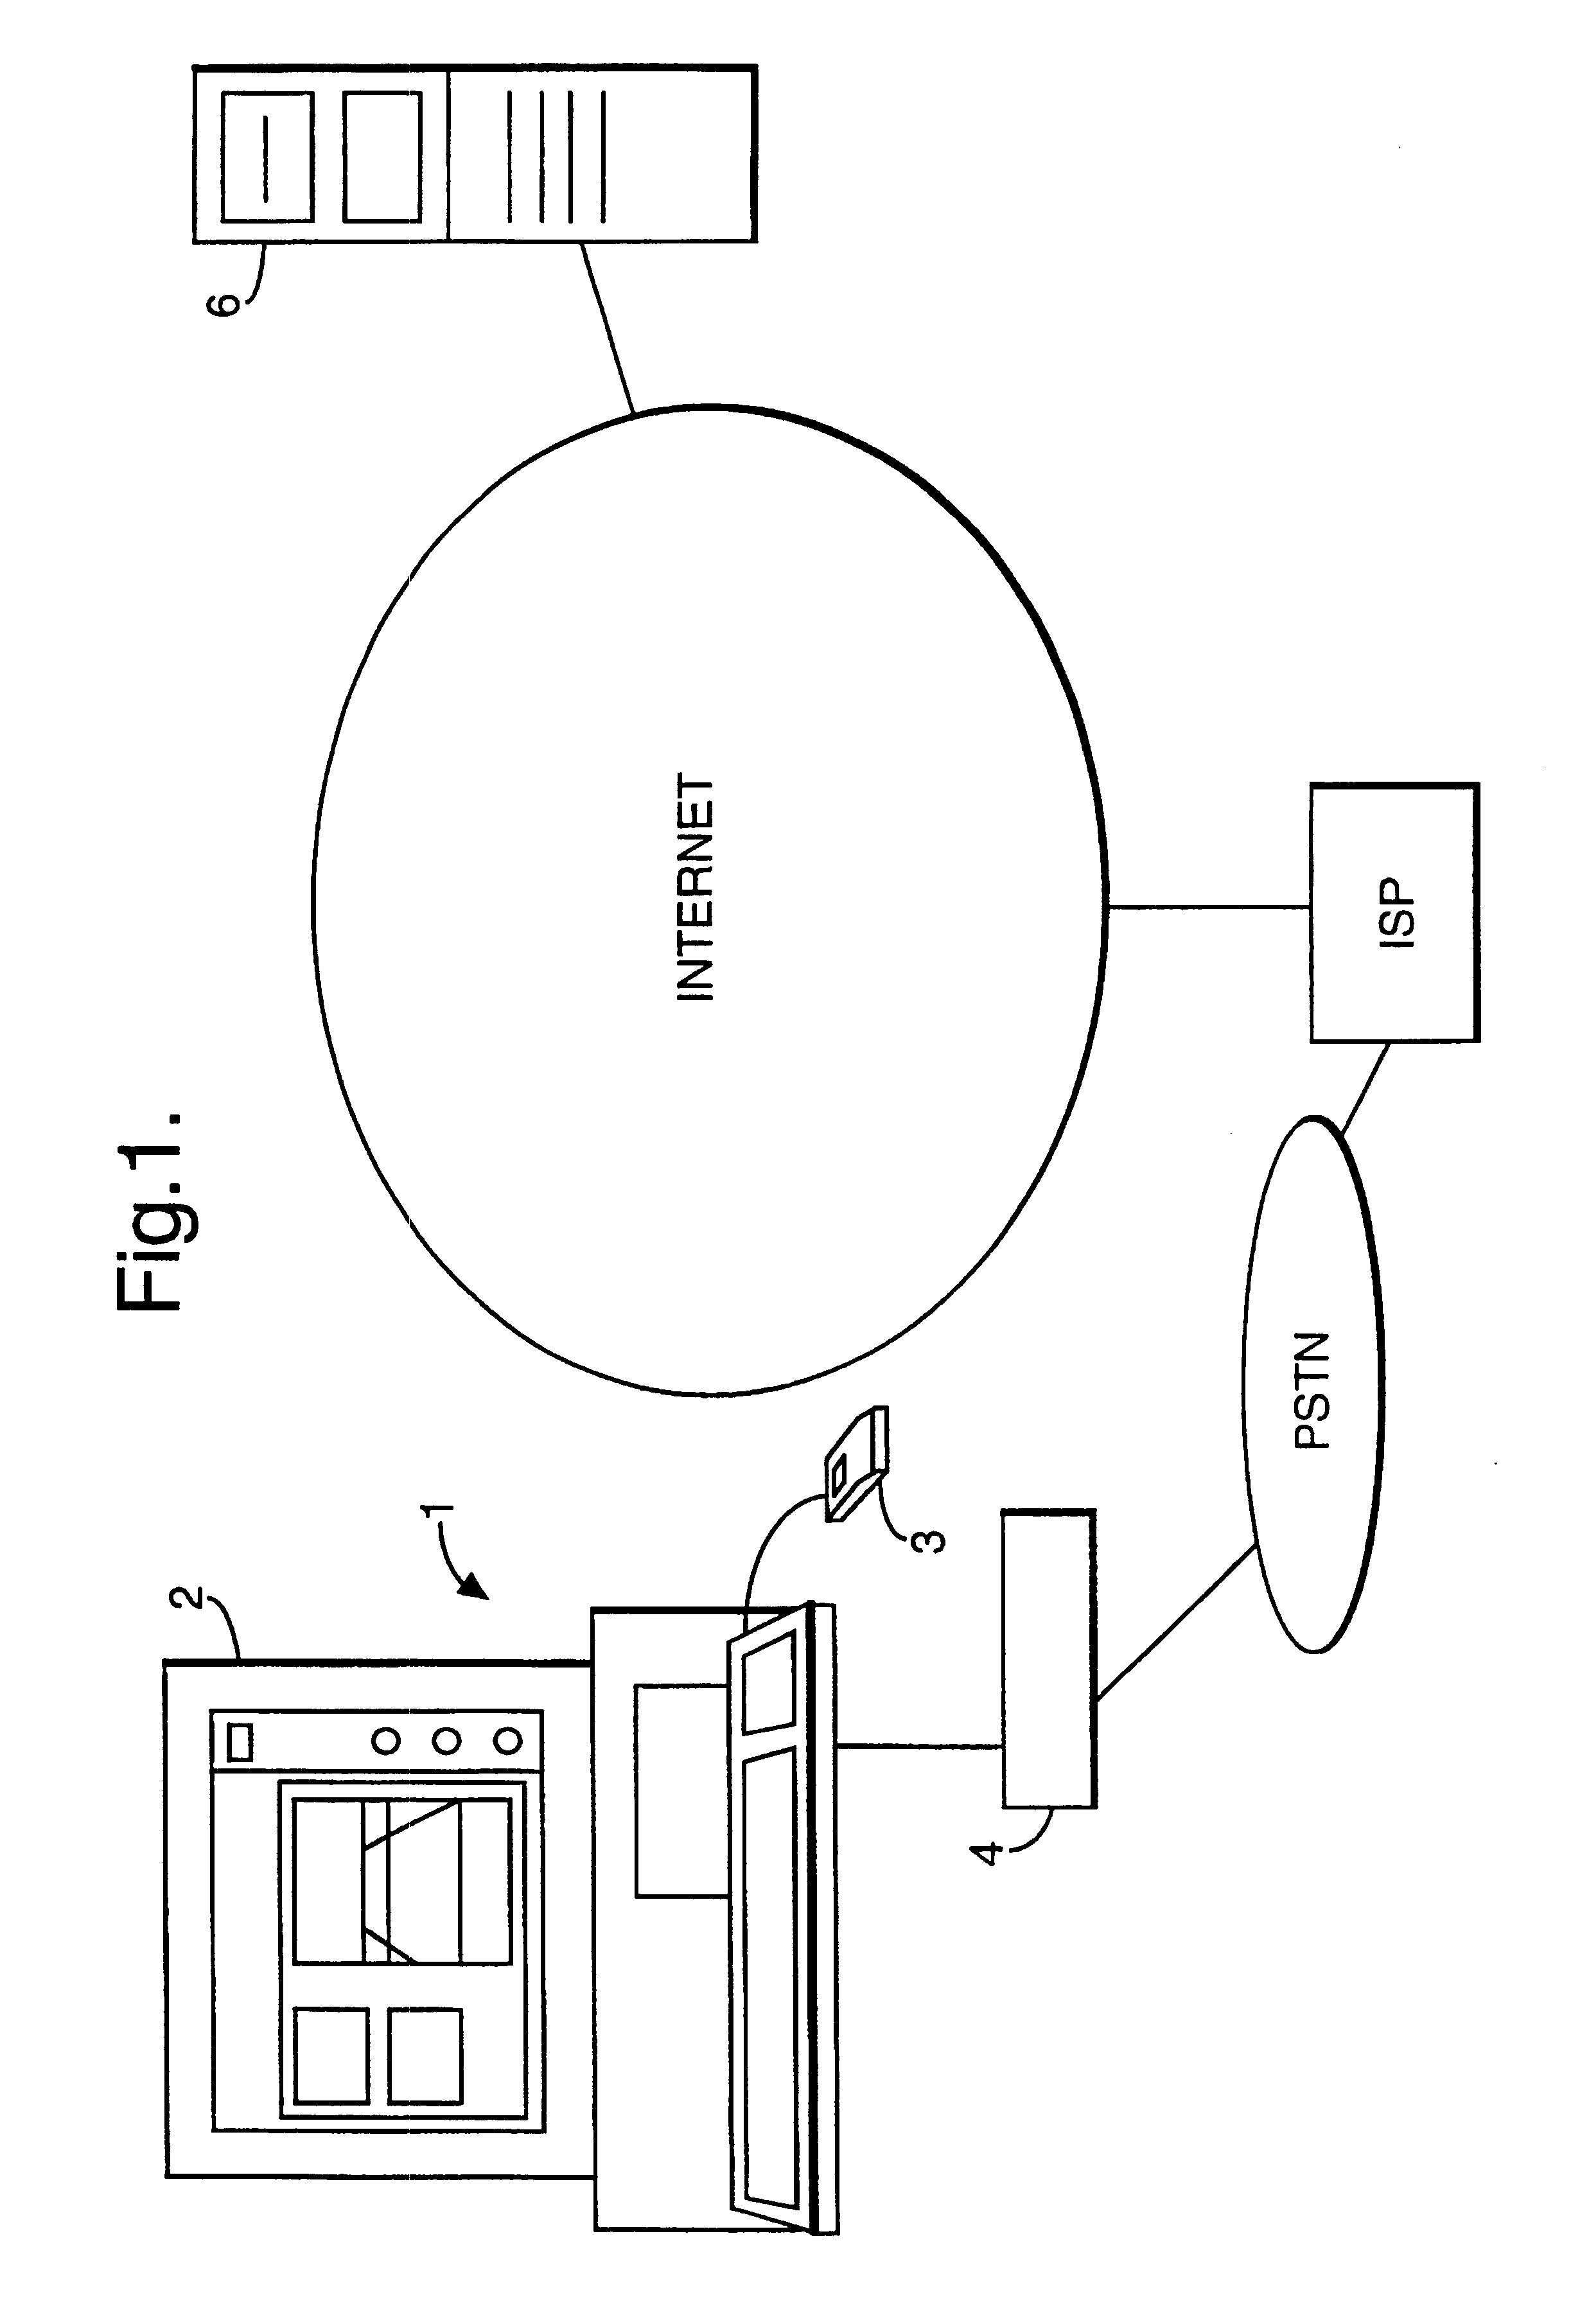 Display terminal user interface with ability to select remotely stored surface finish for mapping onto displayed 3-D surface